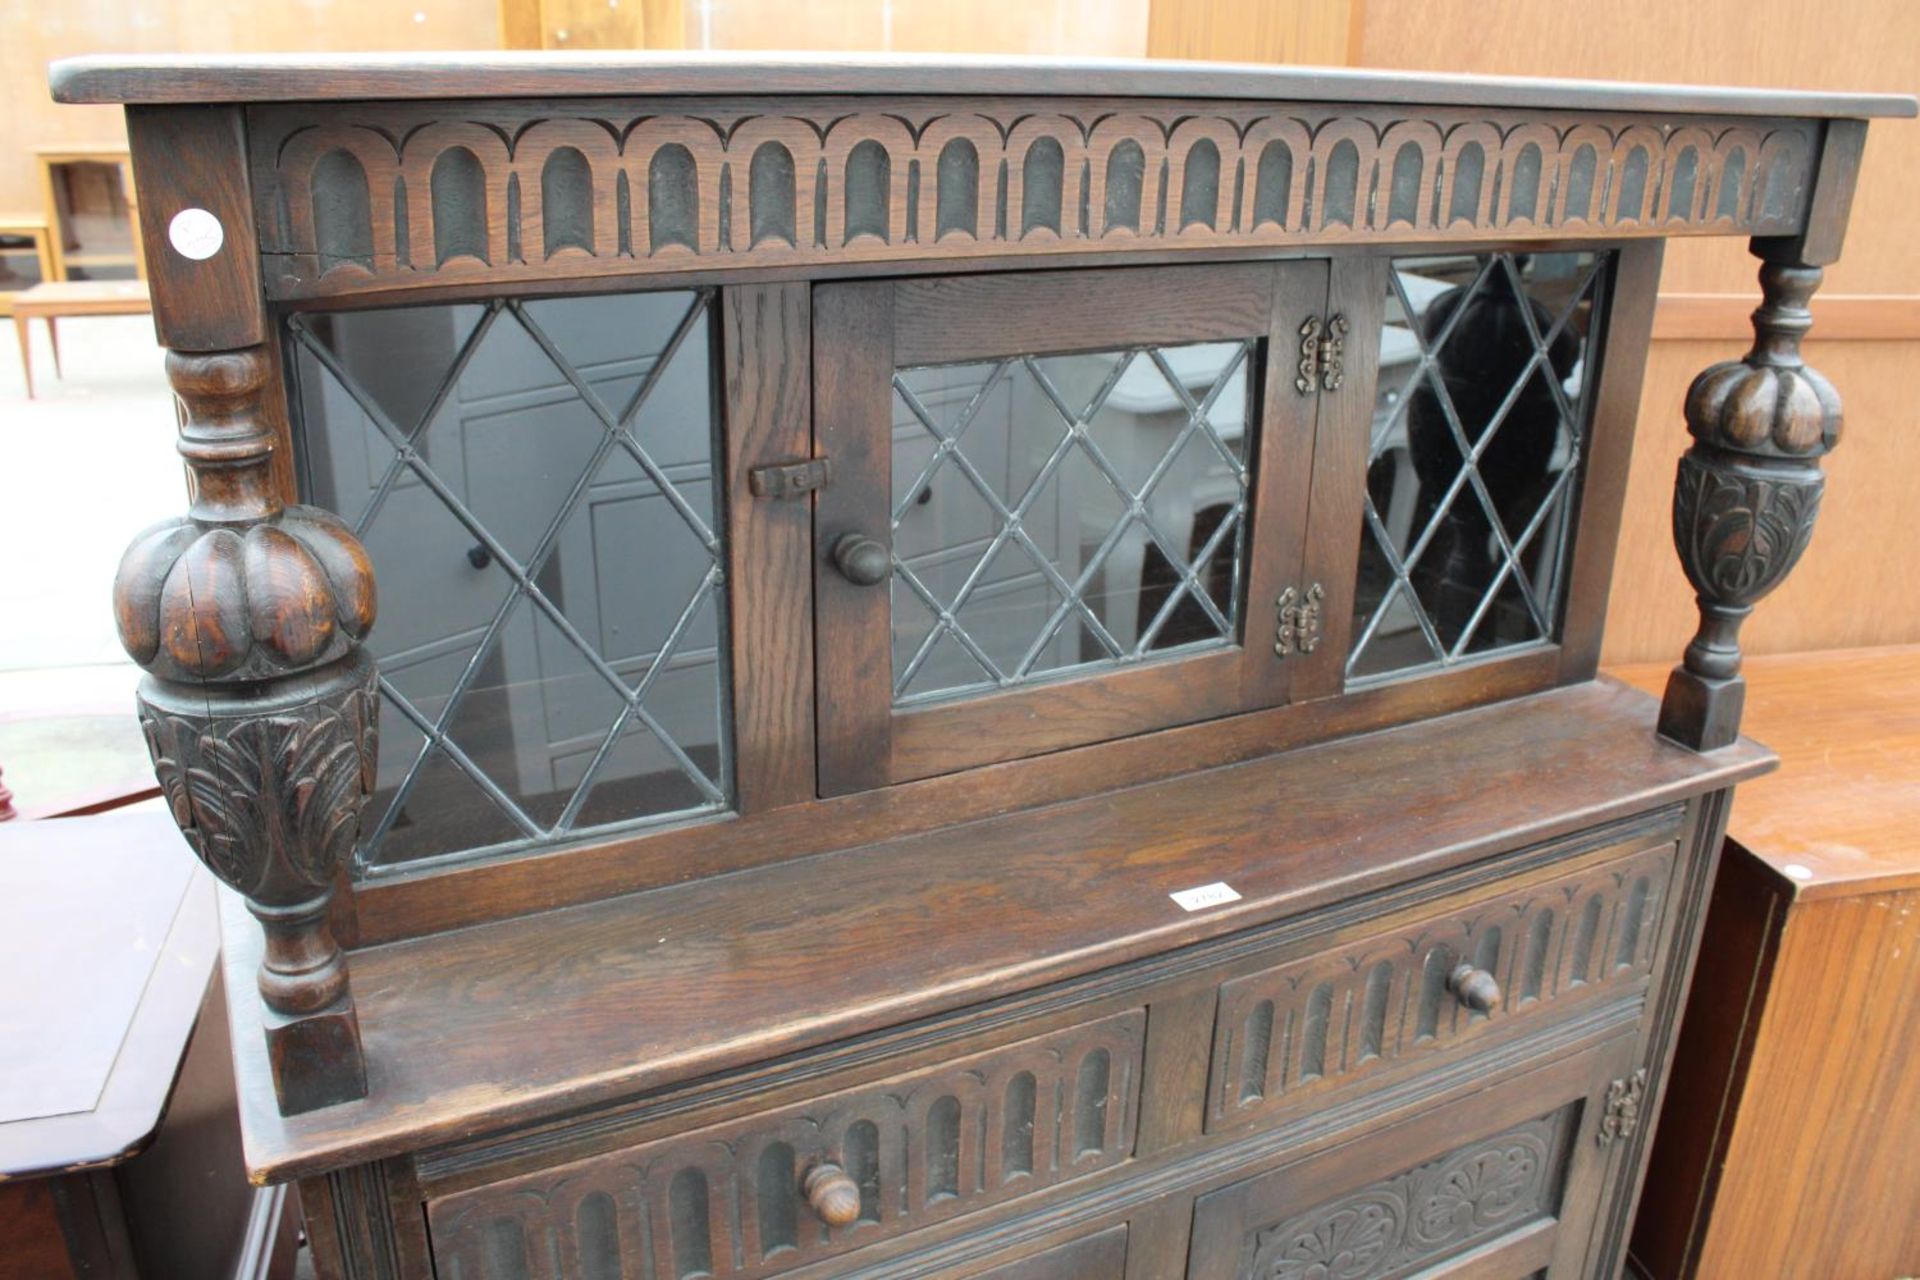 AN OAK JACOBEAN STYLE COURT CUPBOARD WITH GLAZED AND LEADED UPPER PORTION, 54" WIDE - Image 6 of 6